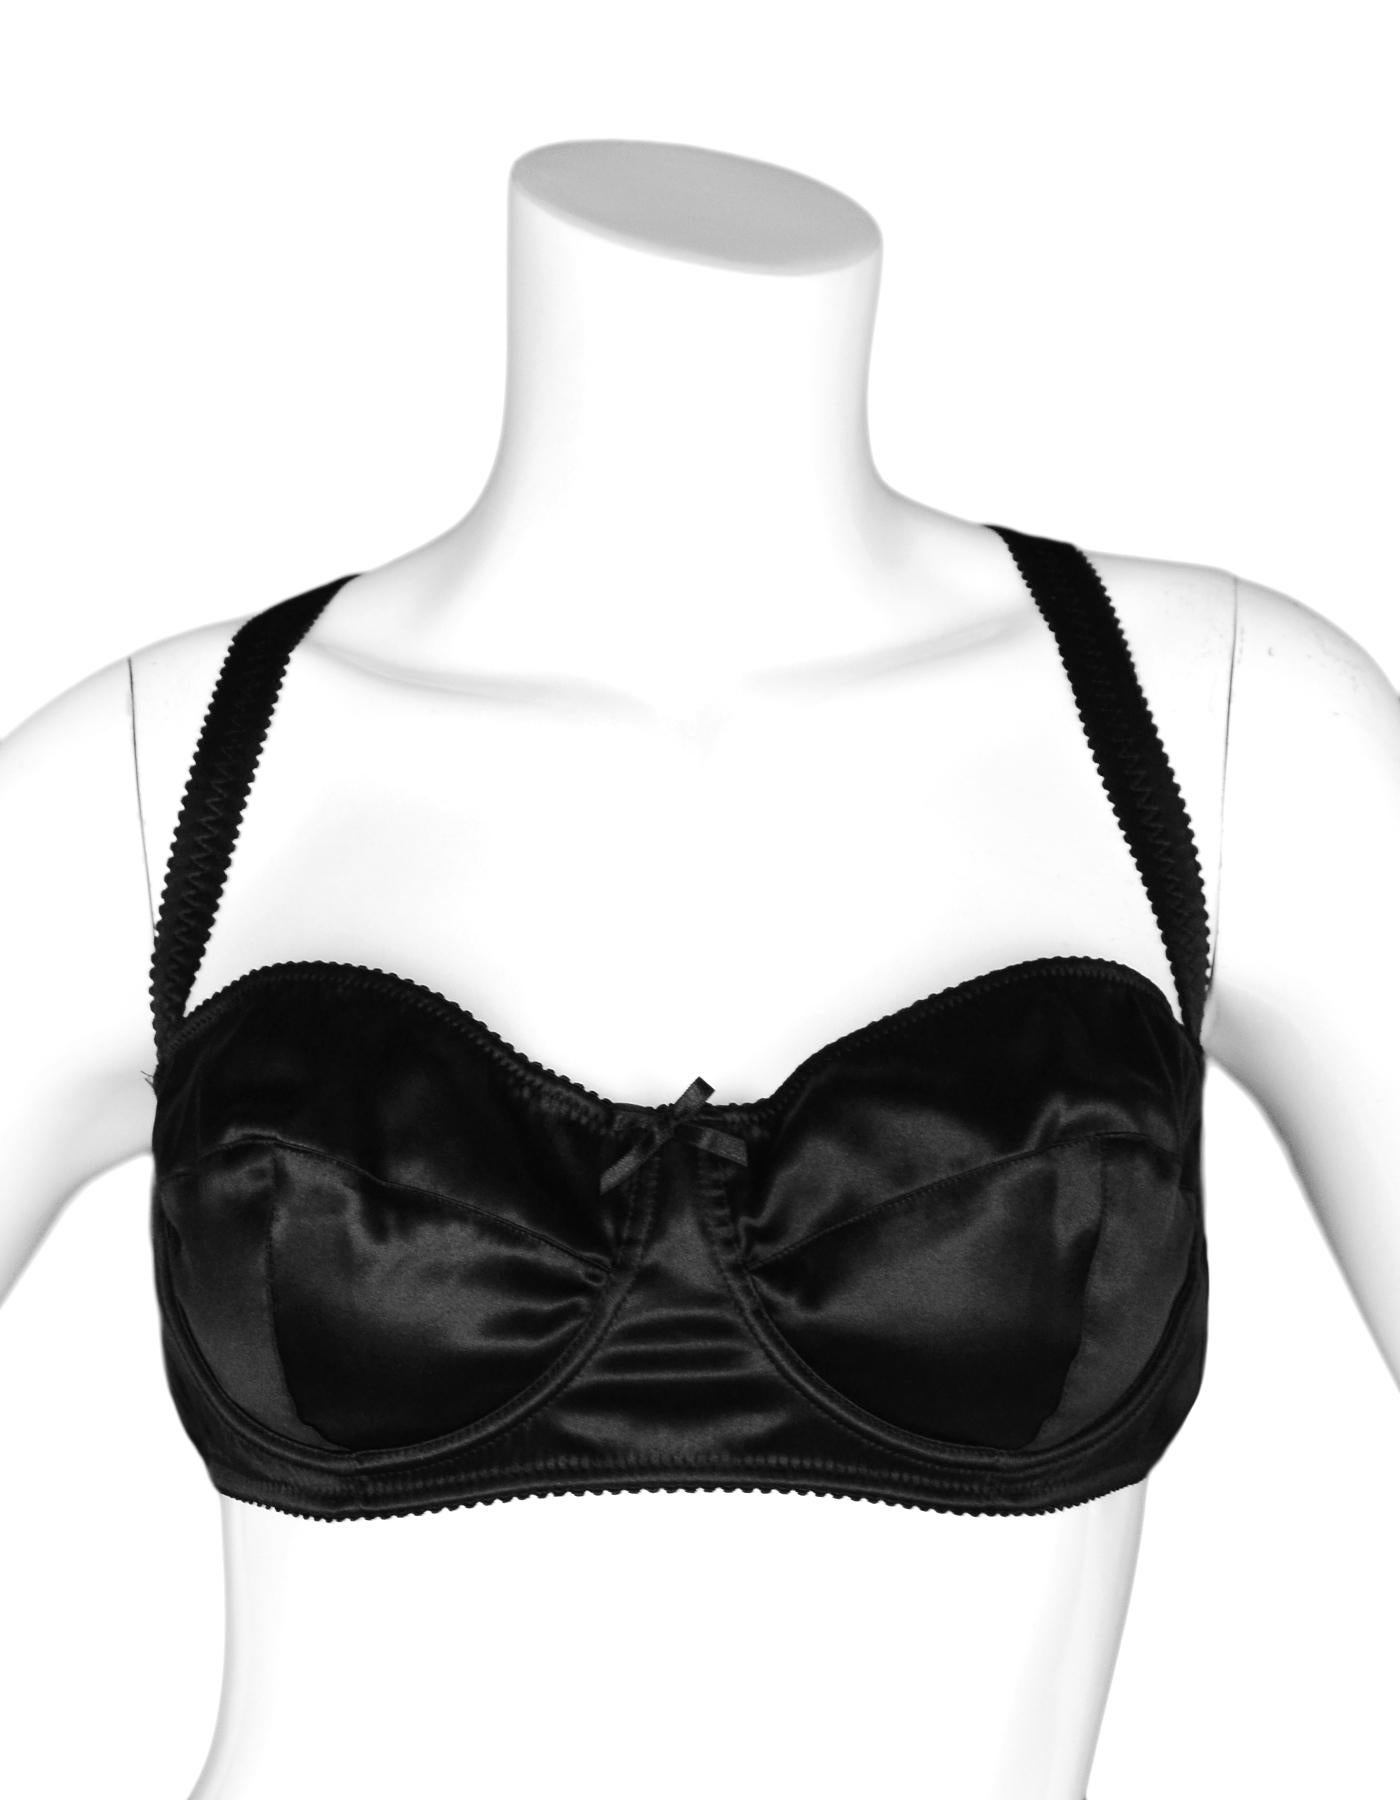 Dolce & Gabbana Black Silk/Satin Bra Sz IT5/US40
Bra only, pictured with Item #5070-1362 Dolce & Gabbana NEW Black Satin Briefs, Sz L

Made In:  Italy
Color: Black
Materials: 94% silk, 6% spandex 
Opening/Closure: Two rows of five clasps at